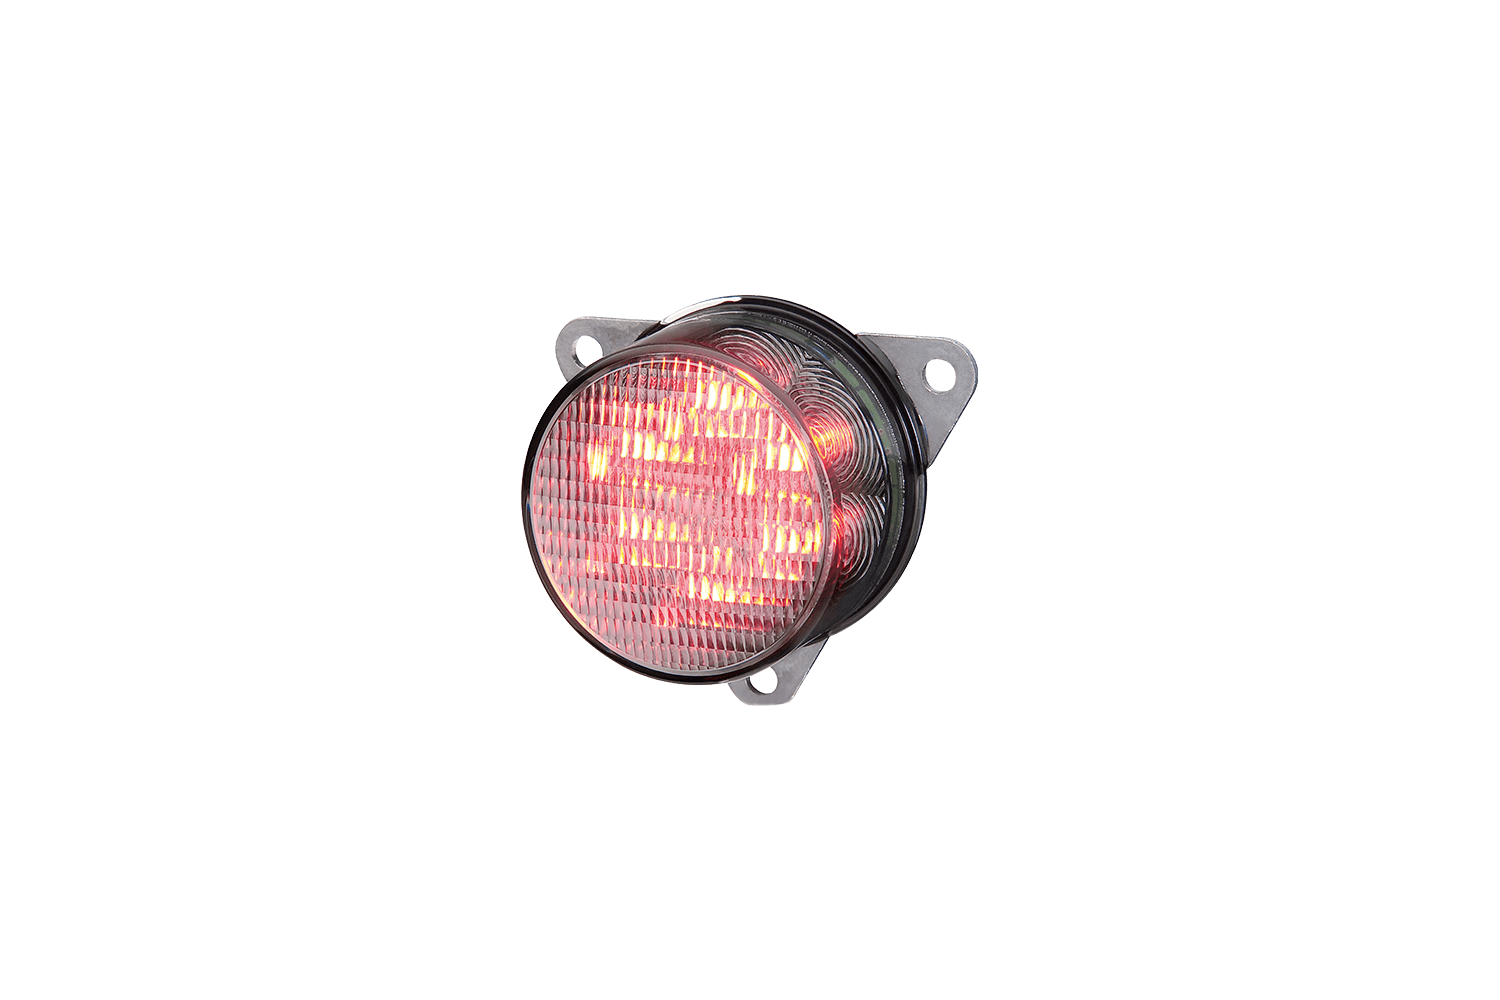 55 mm LED rear lamp from Hella offered by Patlon